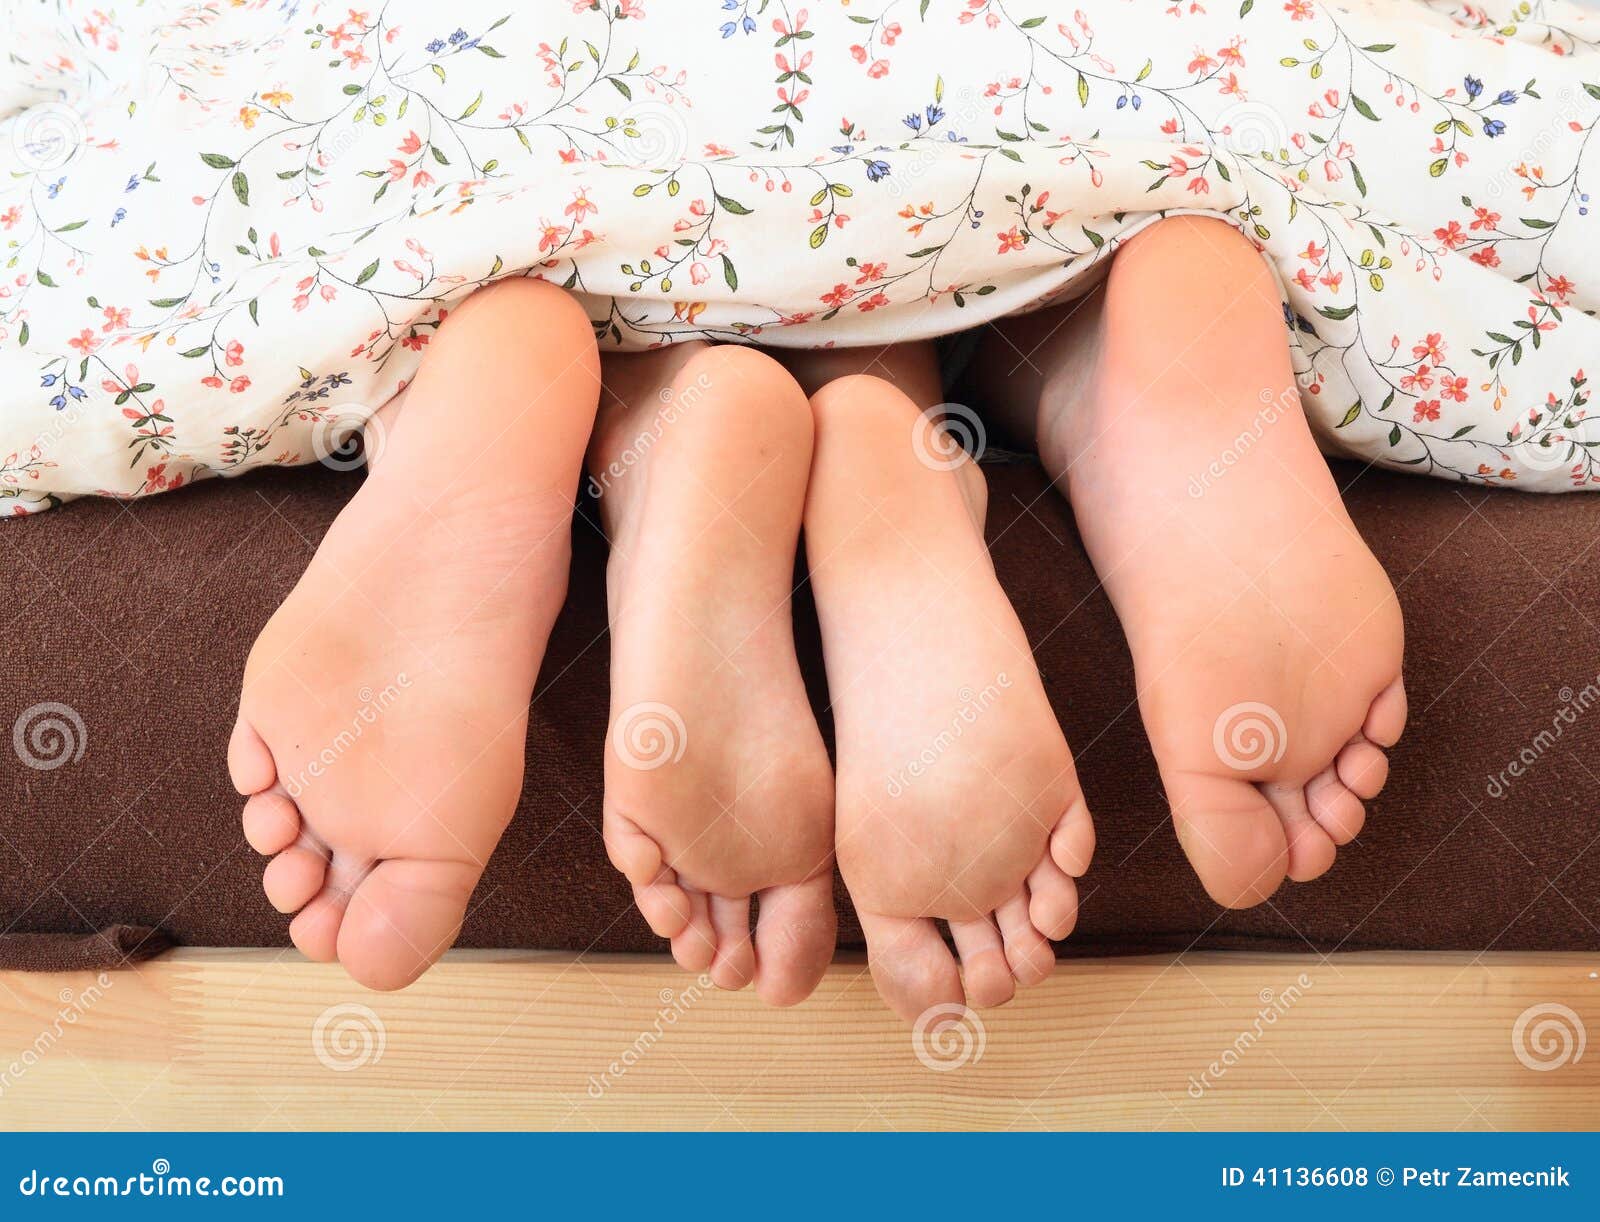 4,899 Kids Girl Feet Stock Photos pic picture